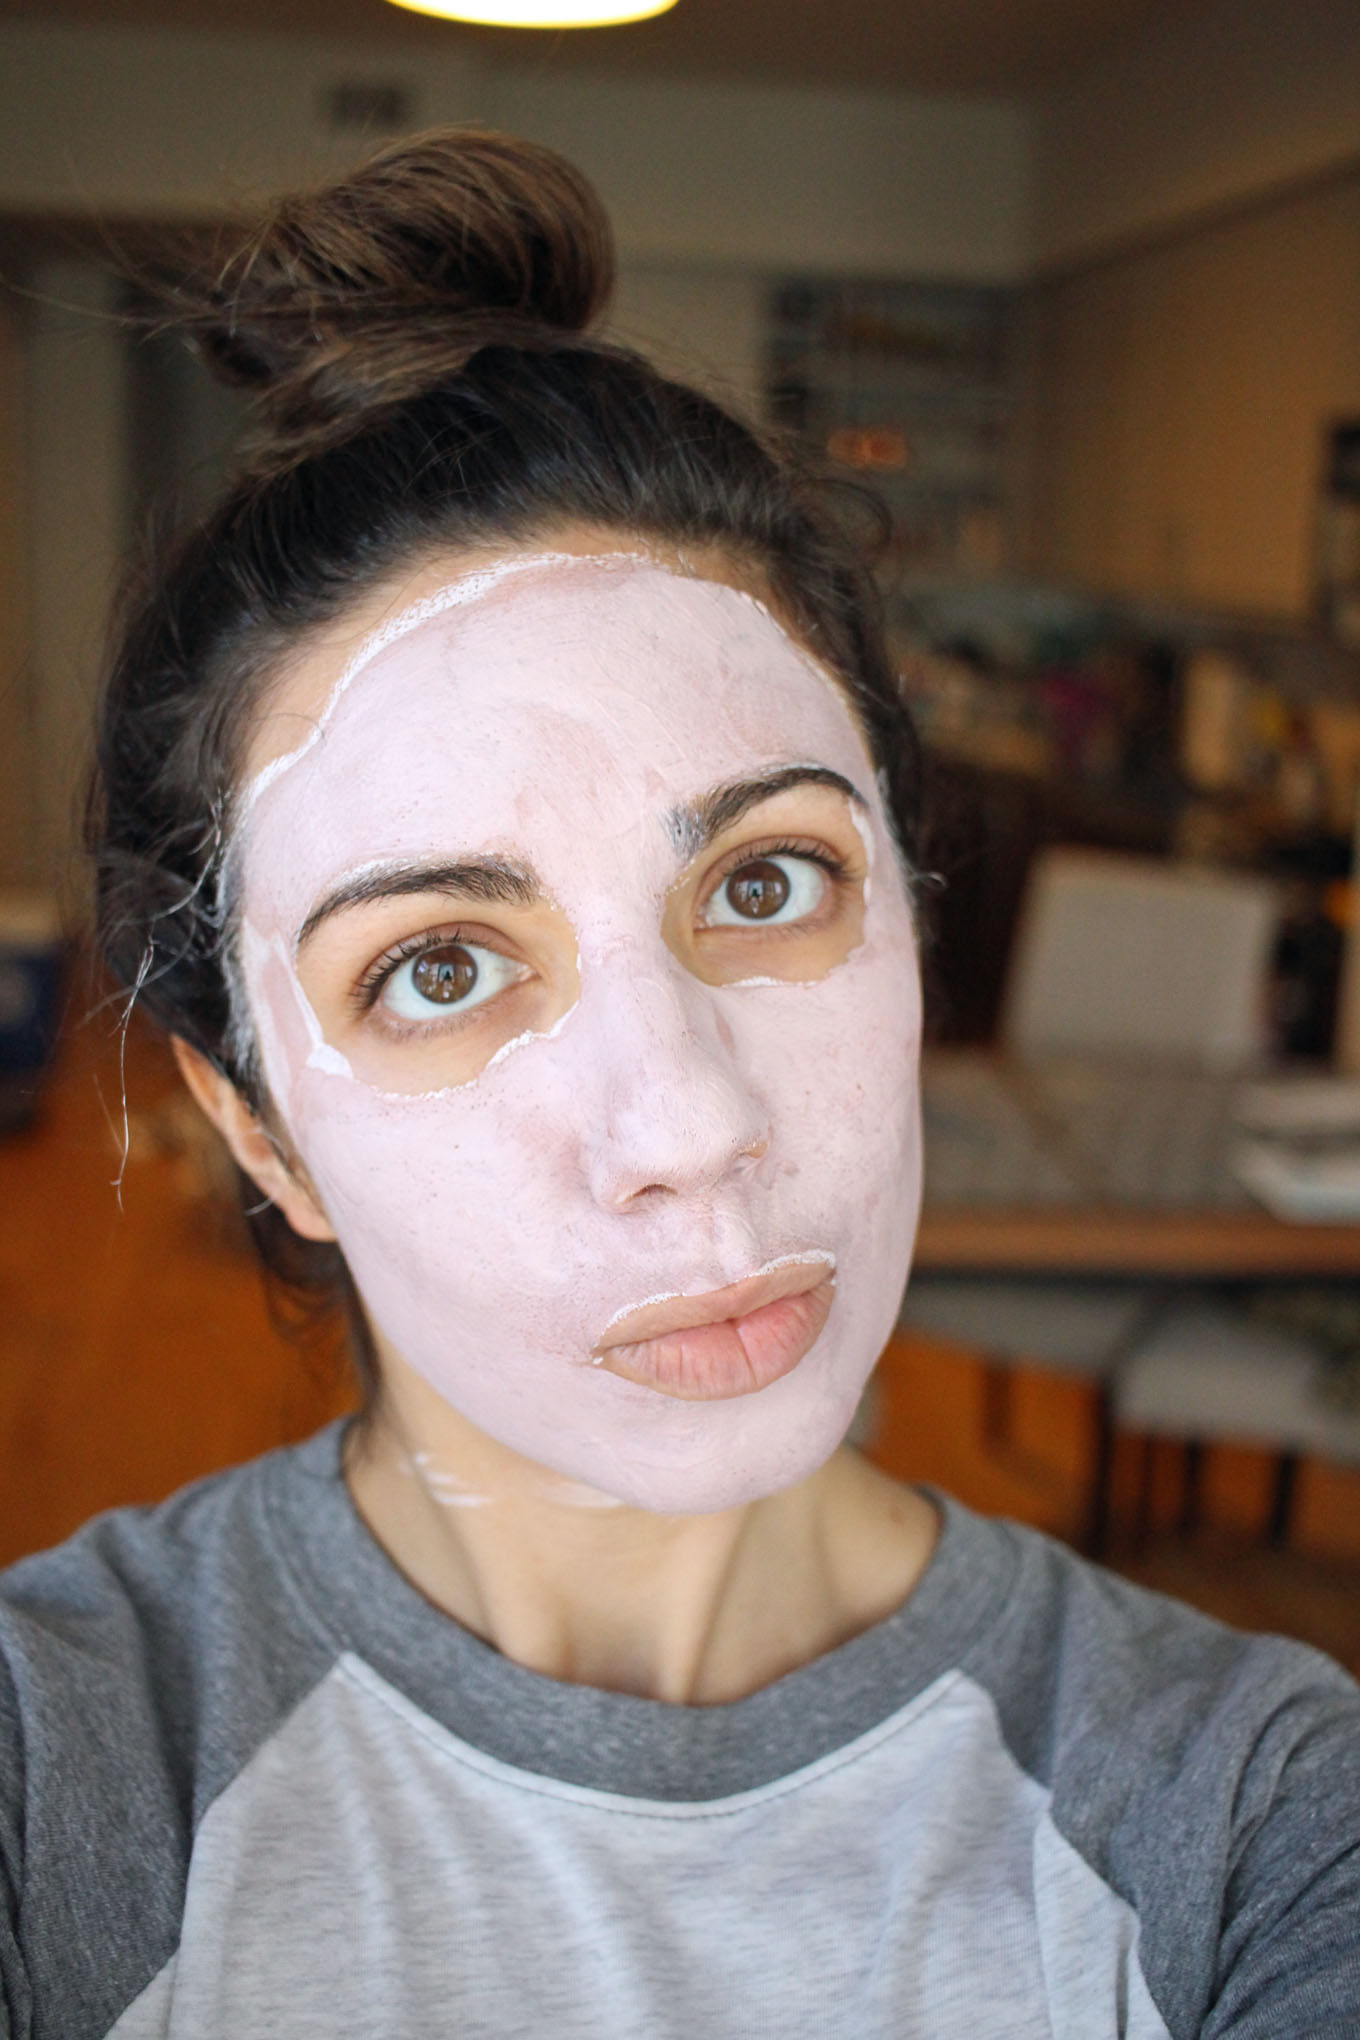 Lifestyle blogger Roxanne of Glass of Glam's Sand and Sky Pink Mask Review - Sand & Sky Australian Pink Clay Mask Review b y Dc beauty blogger Glass of Glam